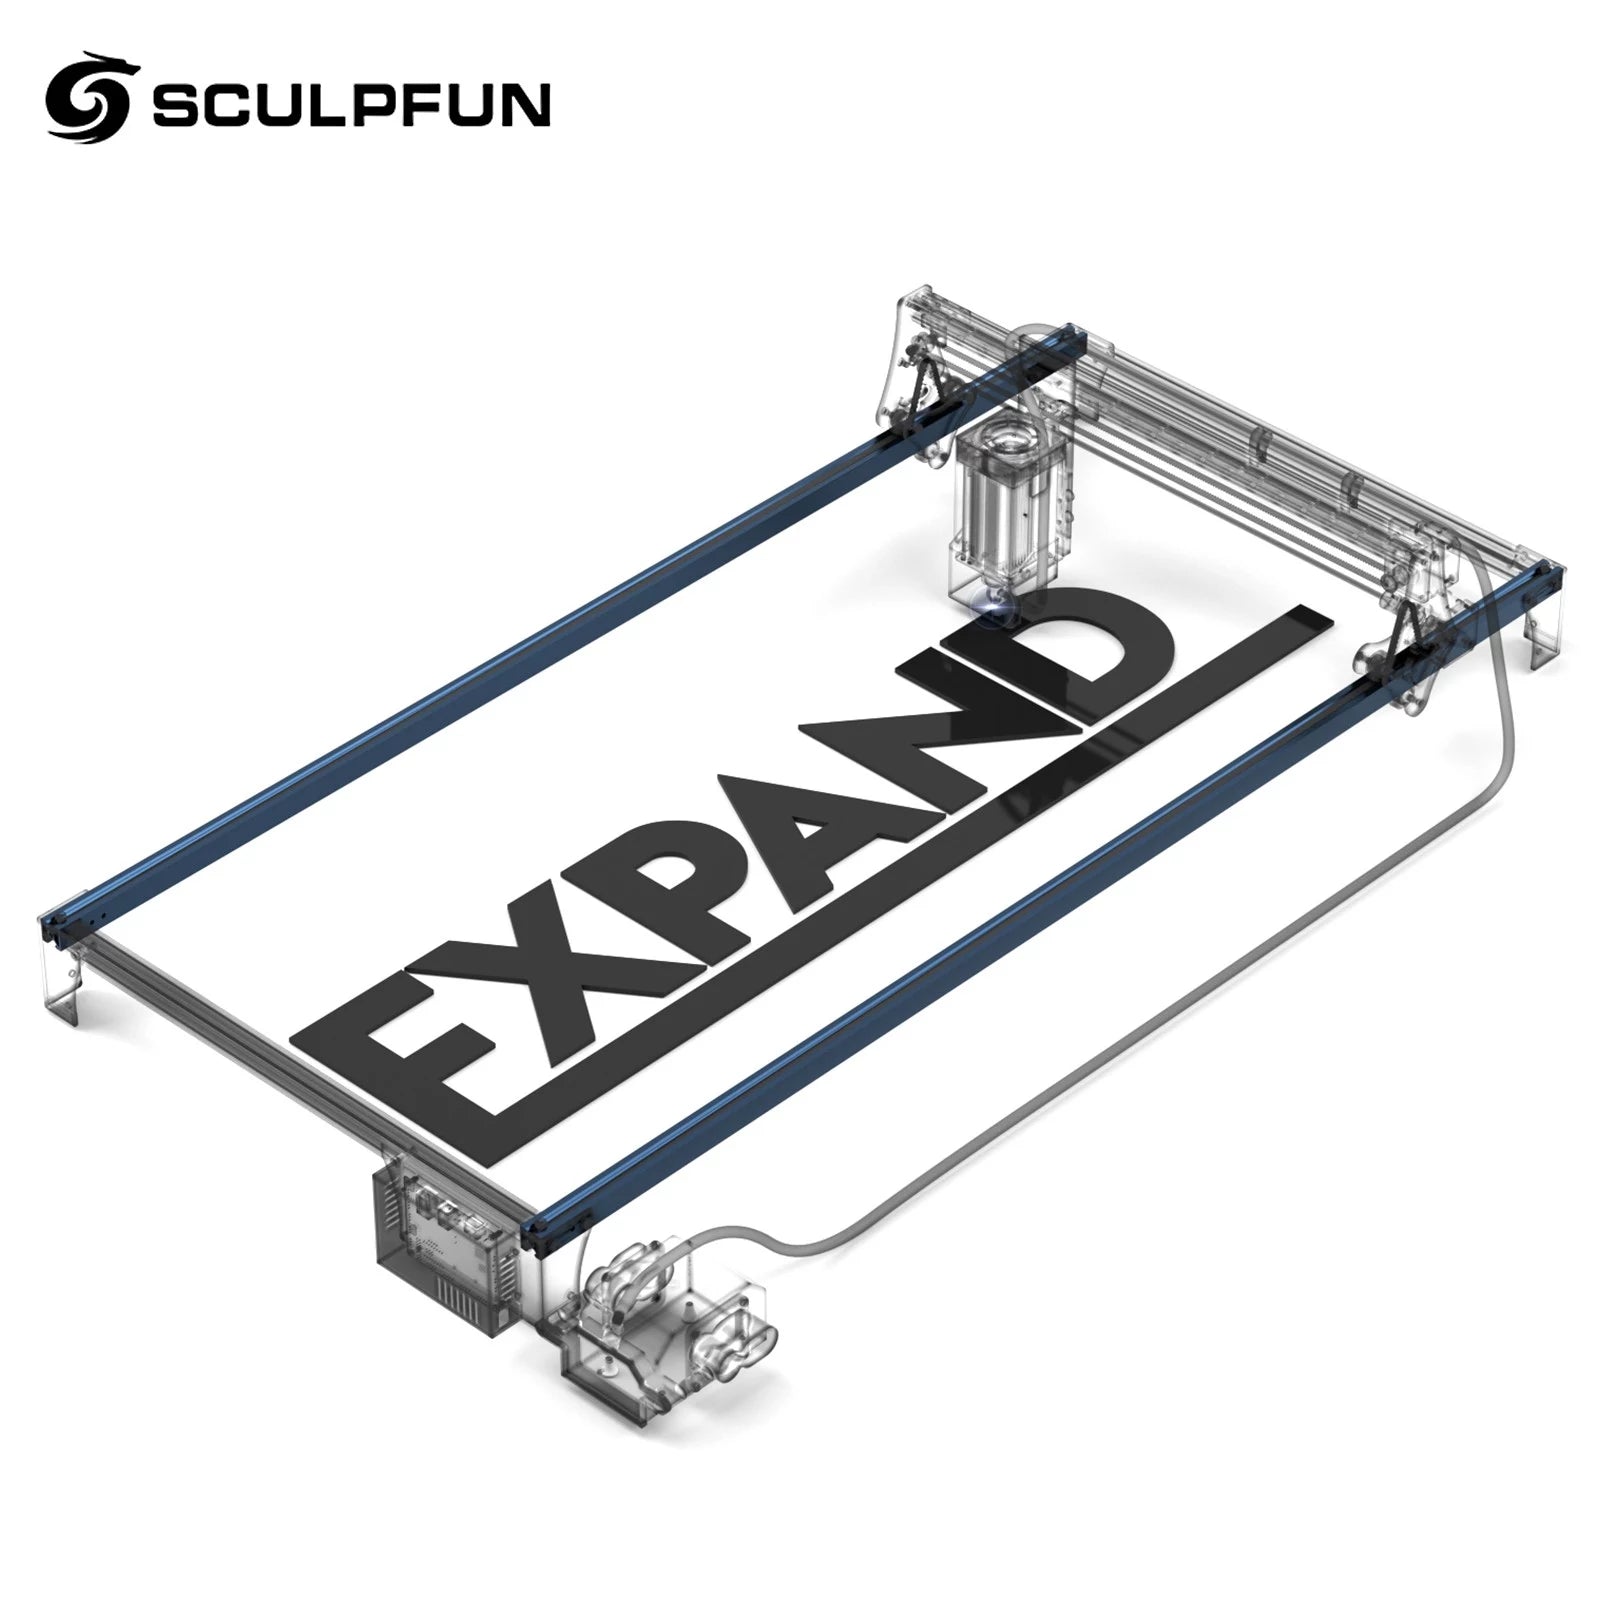 SCULPFUN Y Axis Expansion Kit Only For S30 / S30 Pro/ S30 Pro Max